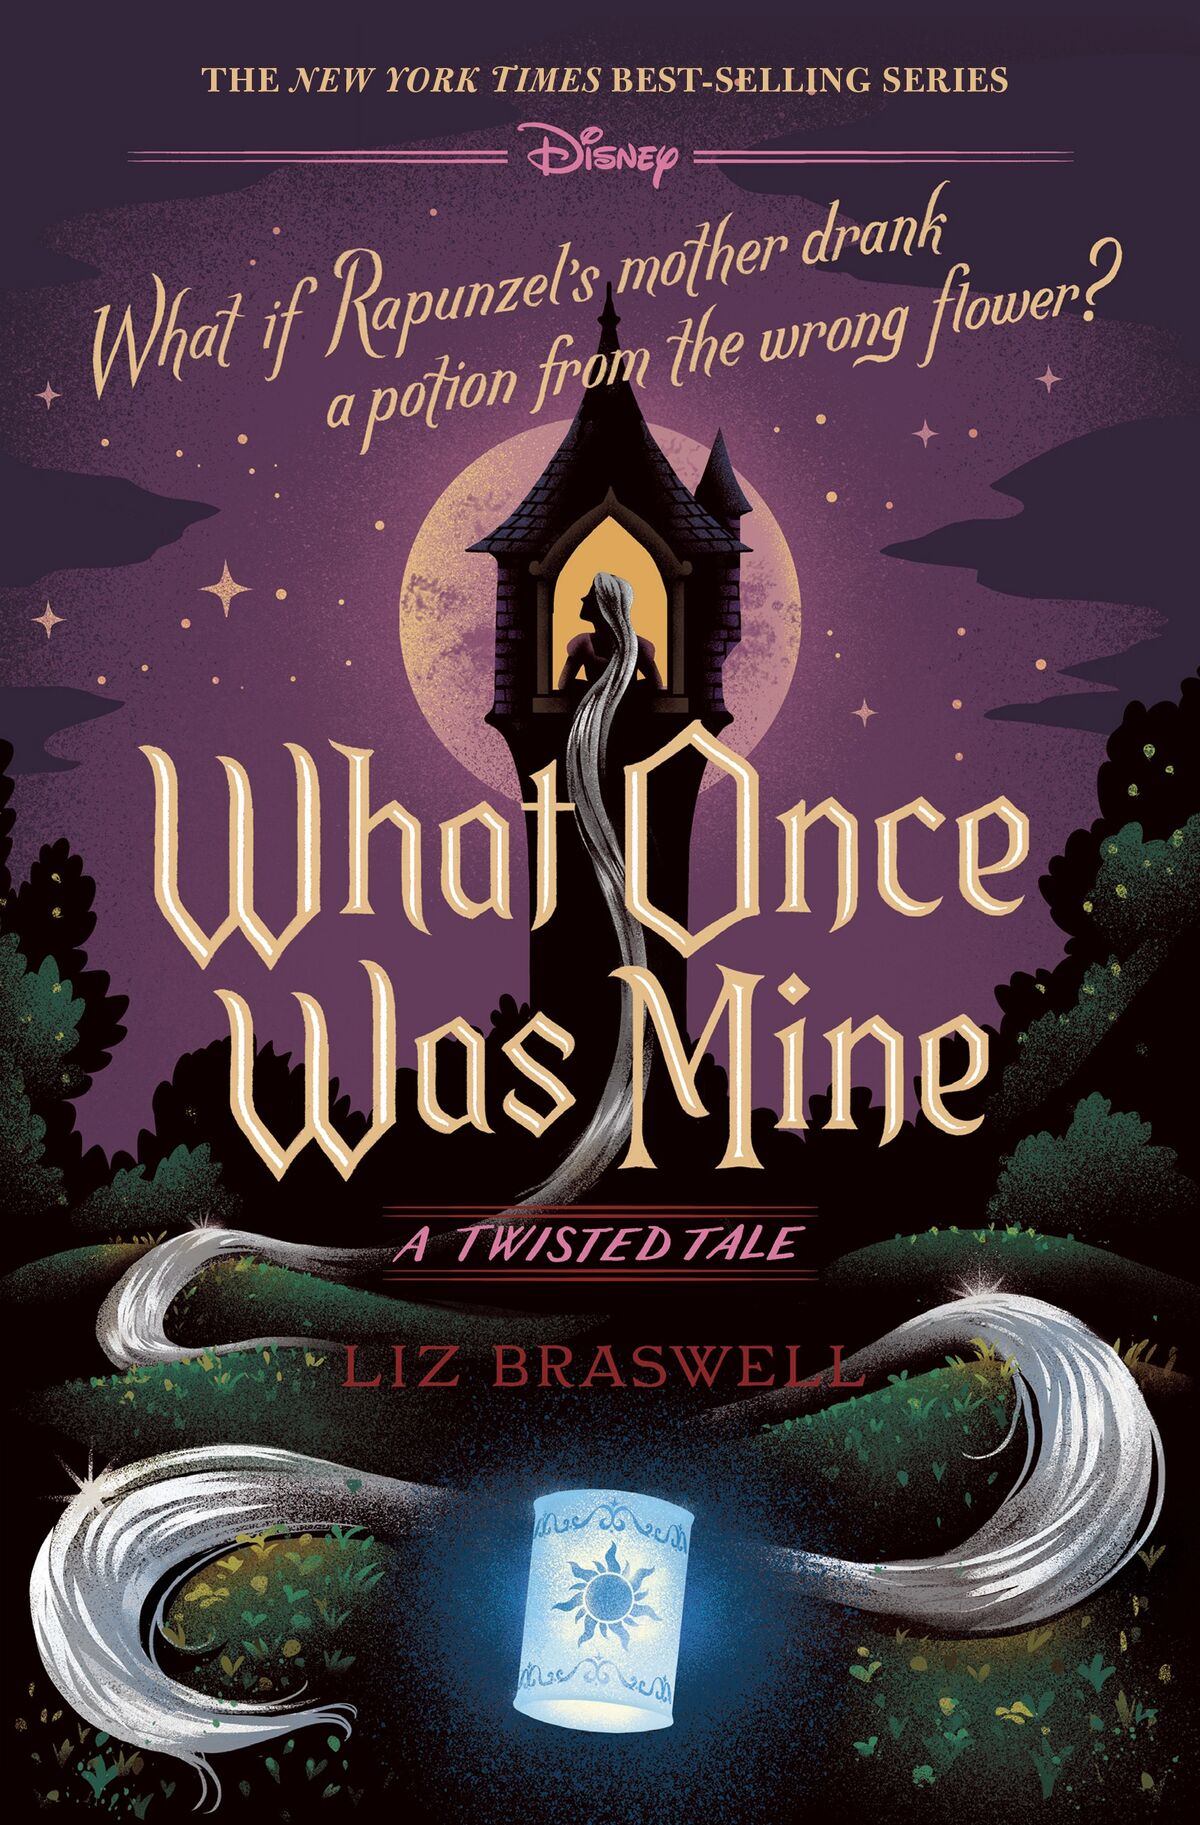 A Twisted Tale Collection by Liz Braswell Includes 3 Books, Poster & Journal